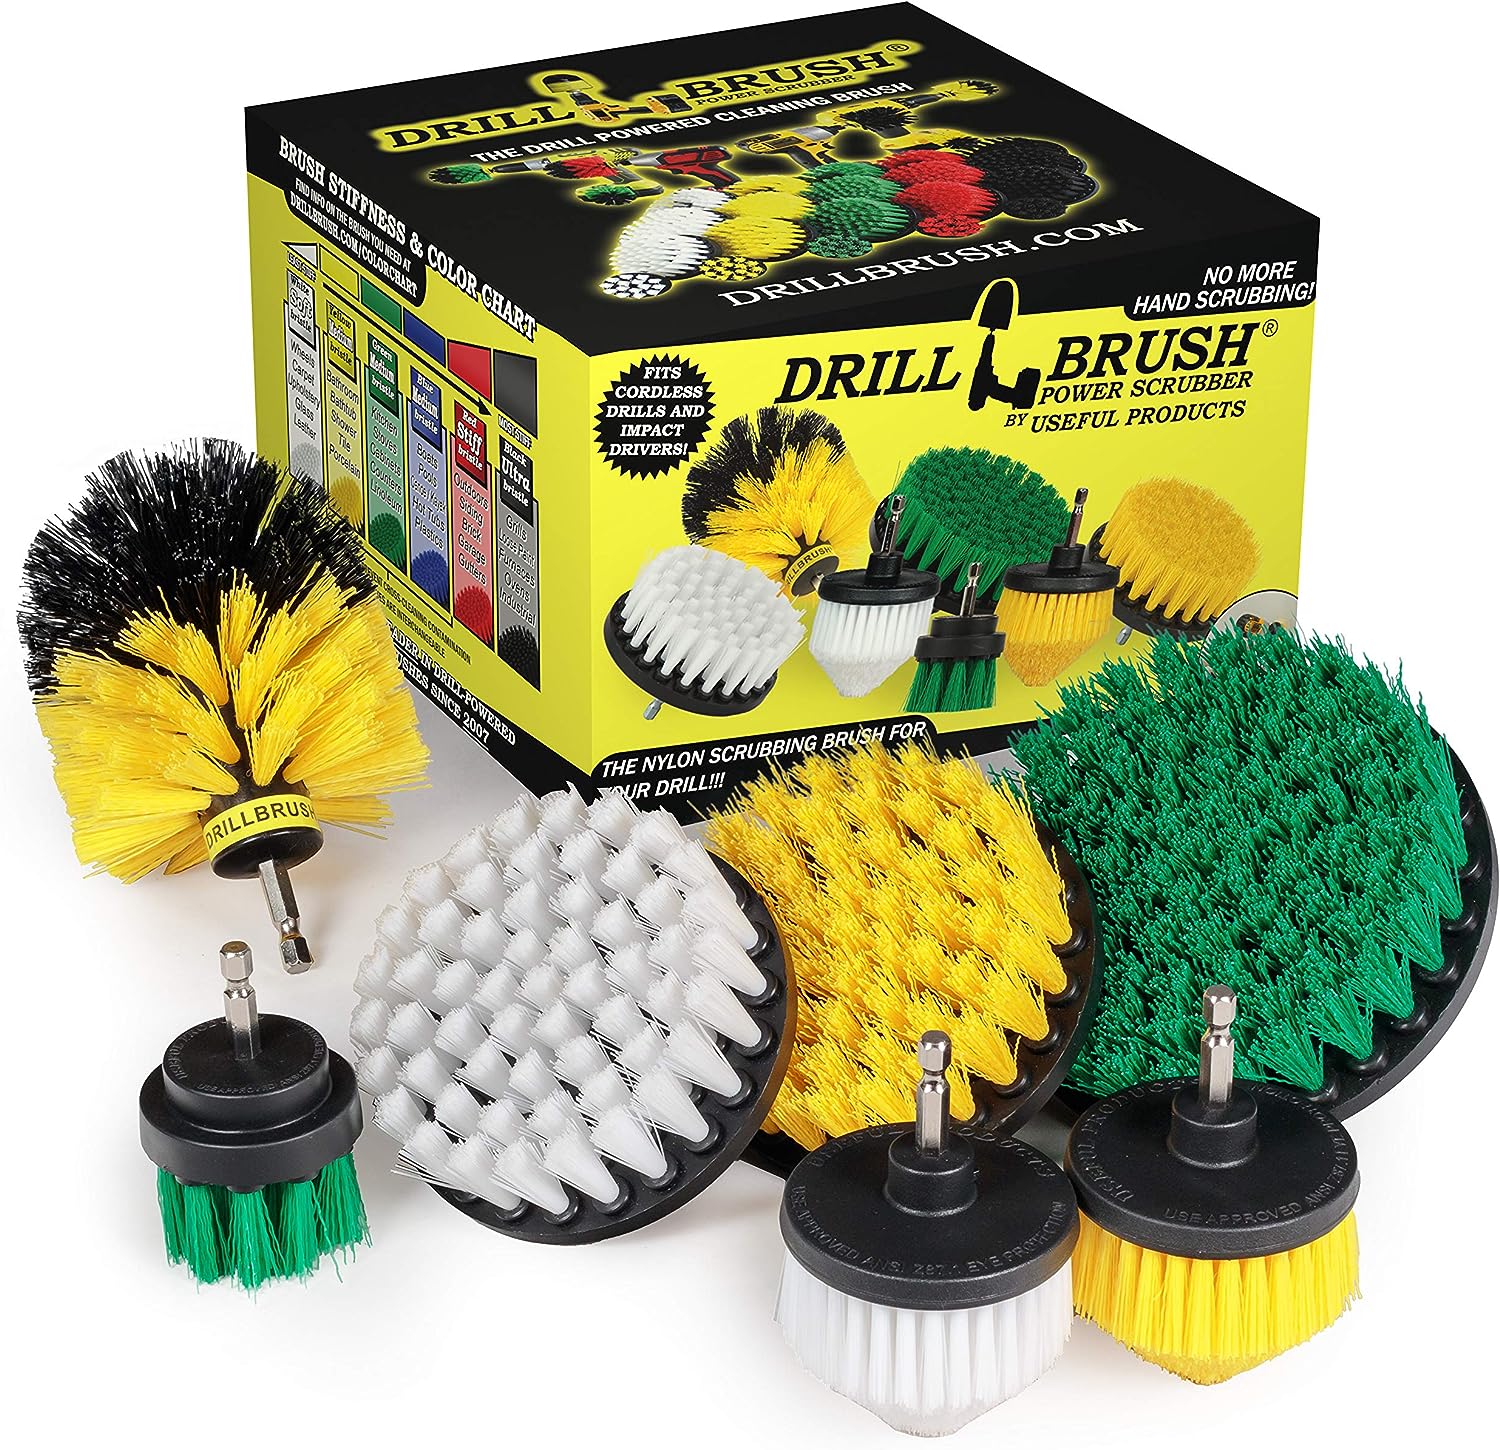 Drill Brush Power Scrubber by Useful Products - Carpet [...]